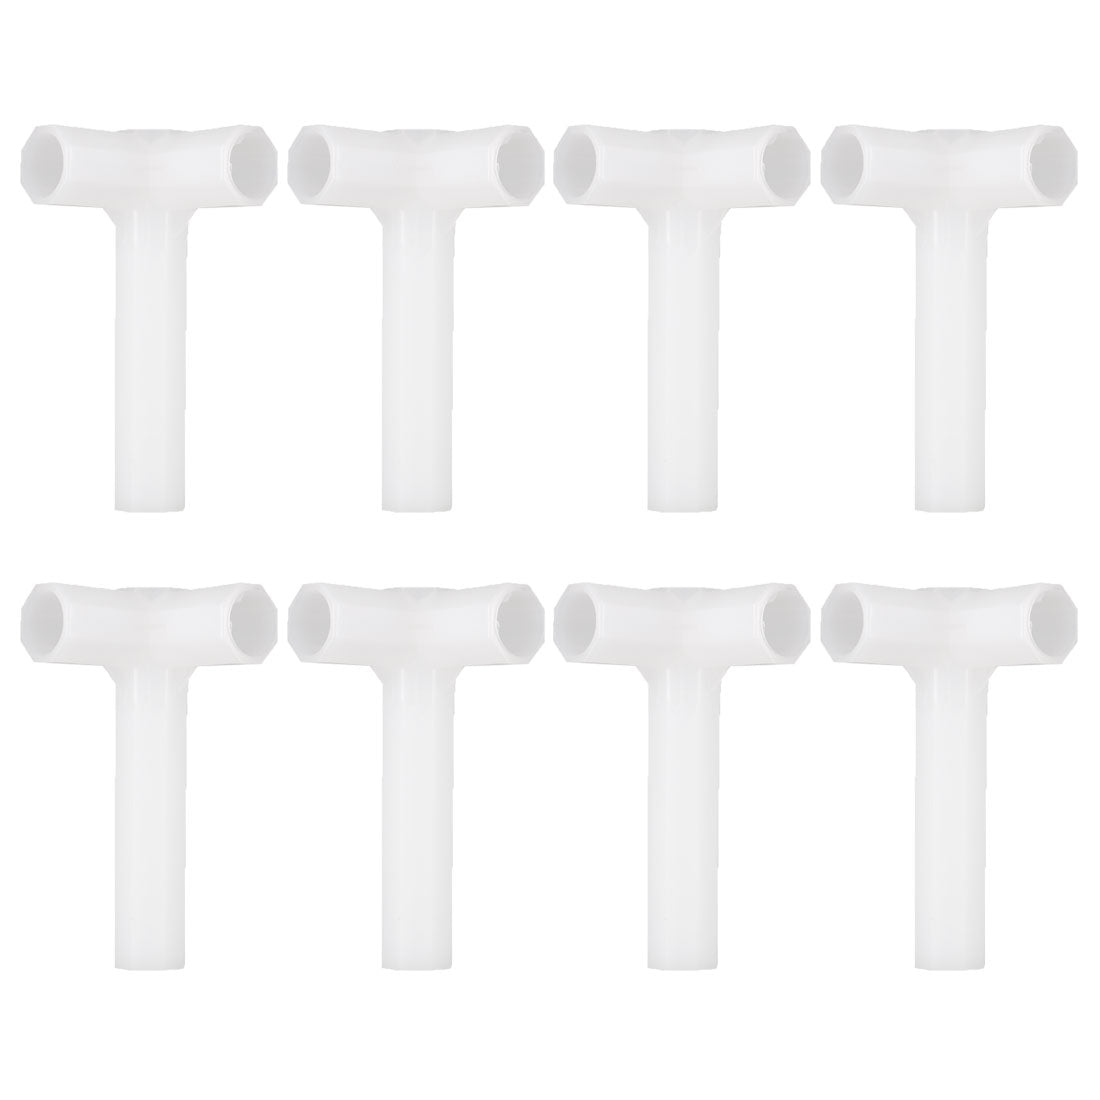 uxcell Uxcell Shoe Rack Connector Parts, 13mm Inner Diameter for Repair Wardrobe 3 Way 8 Pcs